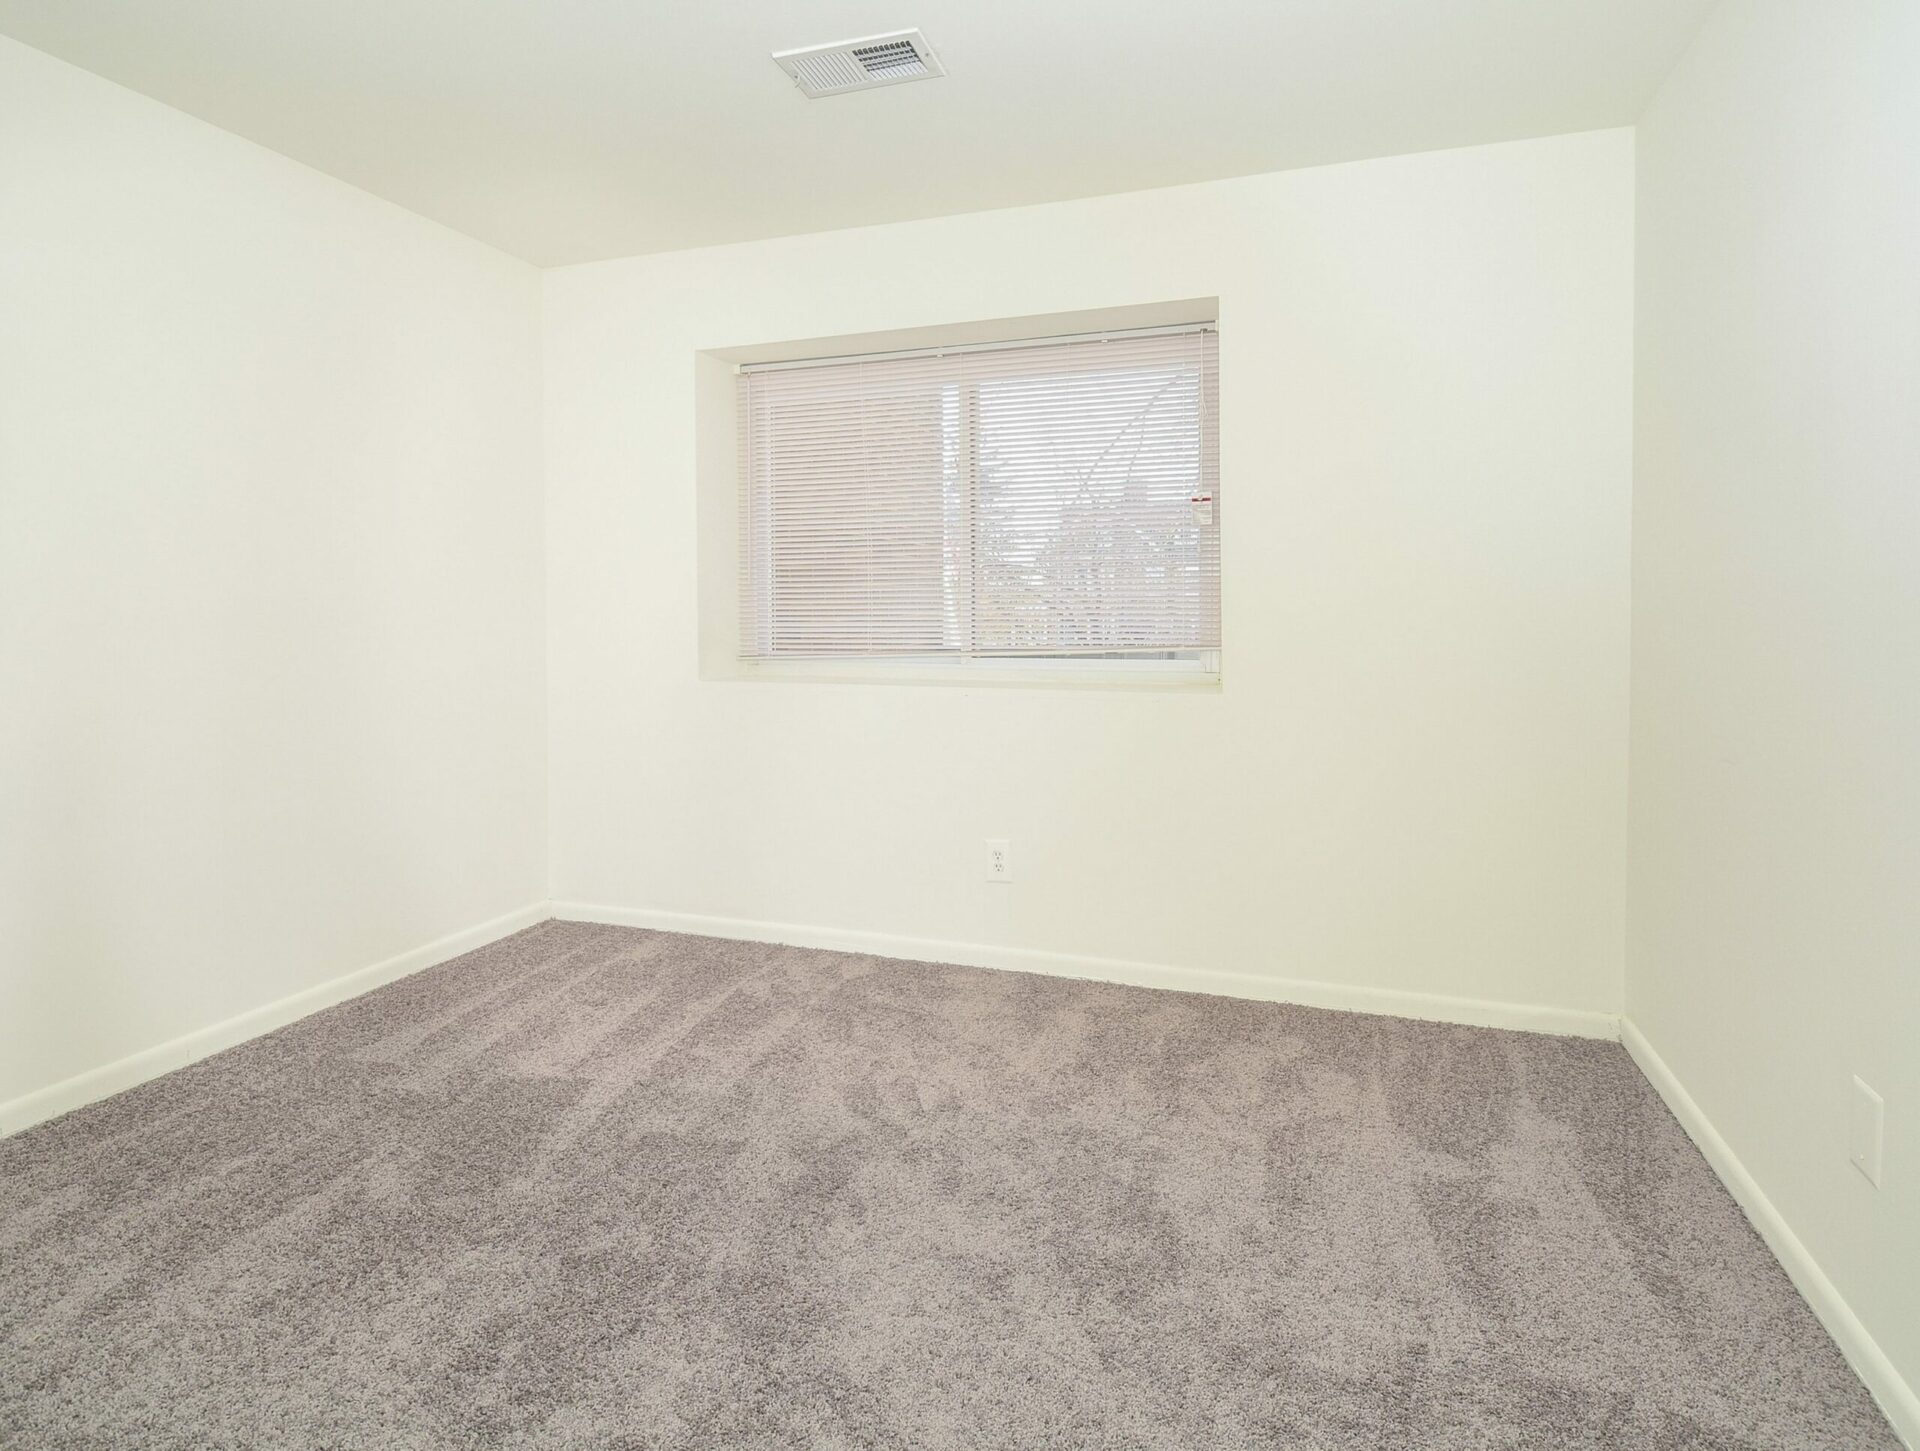 Bedroom with grey carpets, a window, and white walls at Main Line Berwyn.